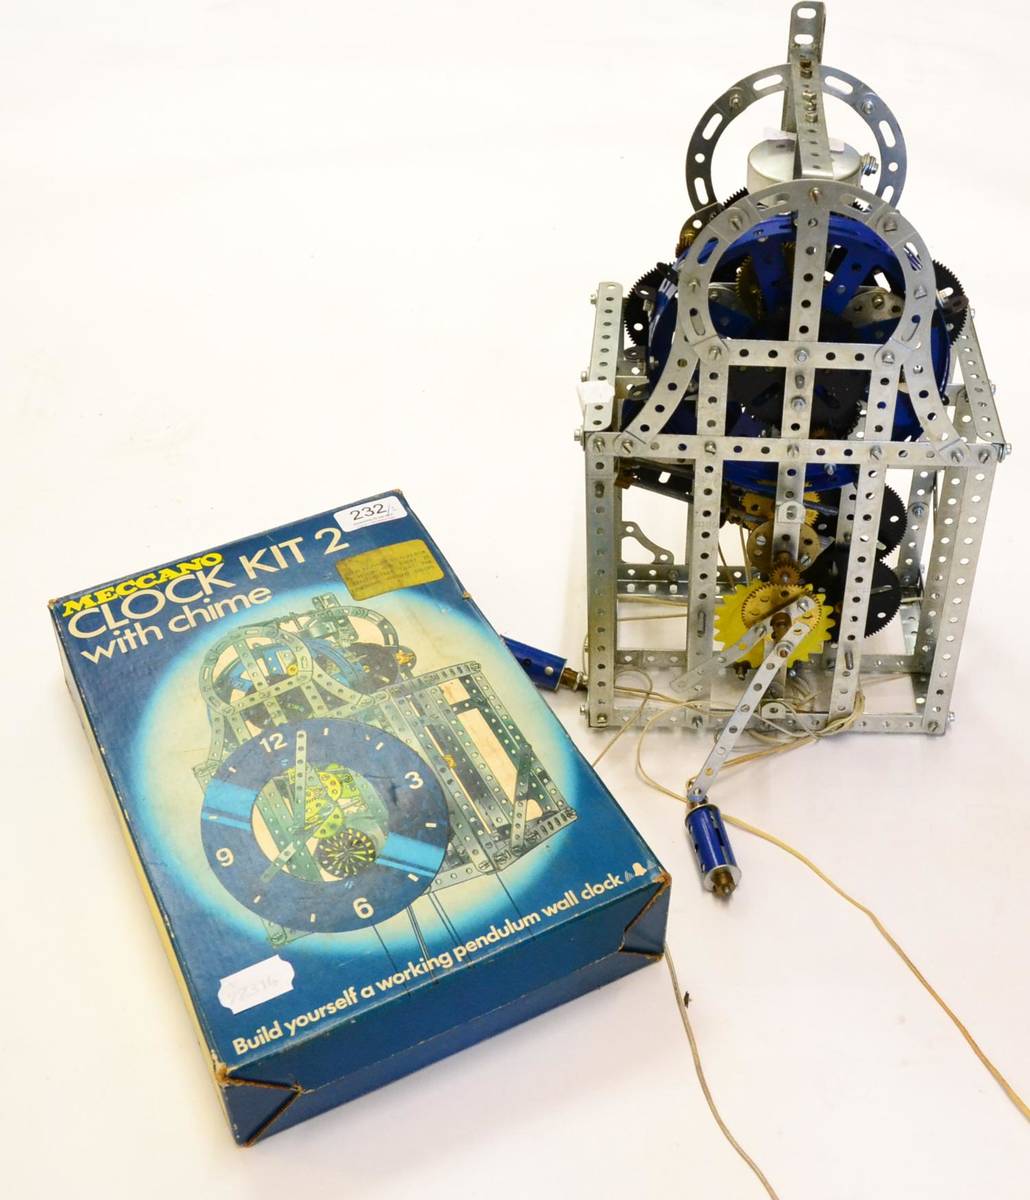 Lot 232 - Meccano Clock Kit 2 With Chime nickel/blue, largely constructed, with original box (E-G)